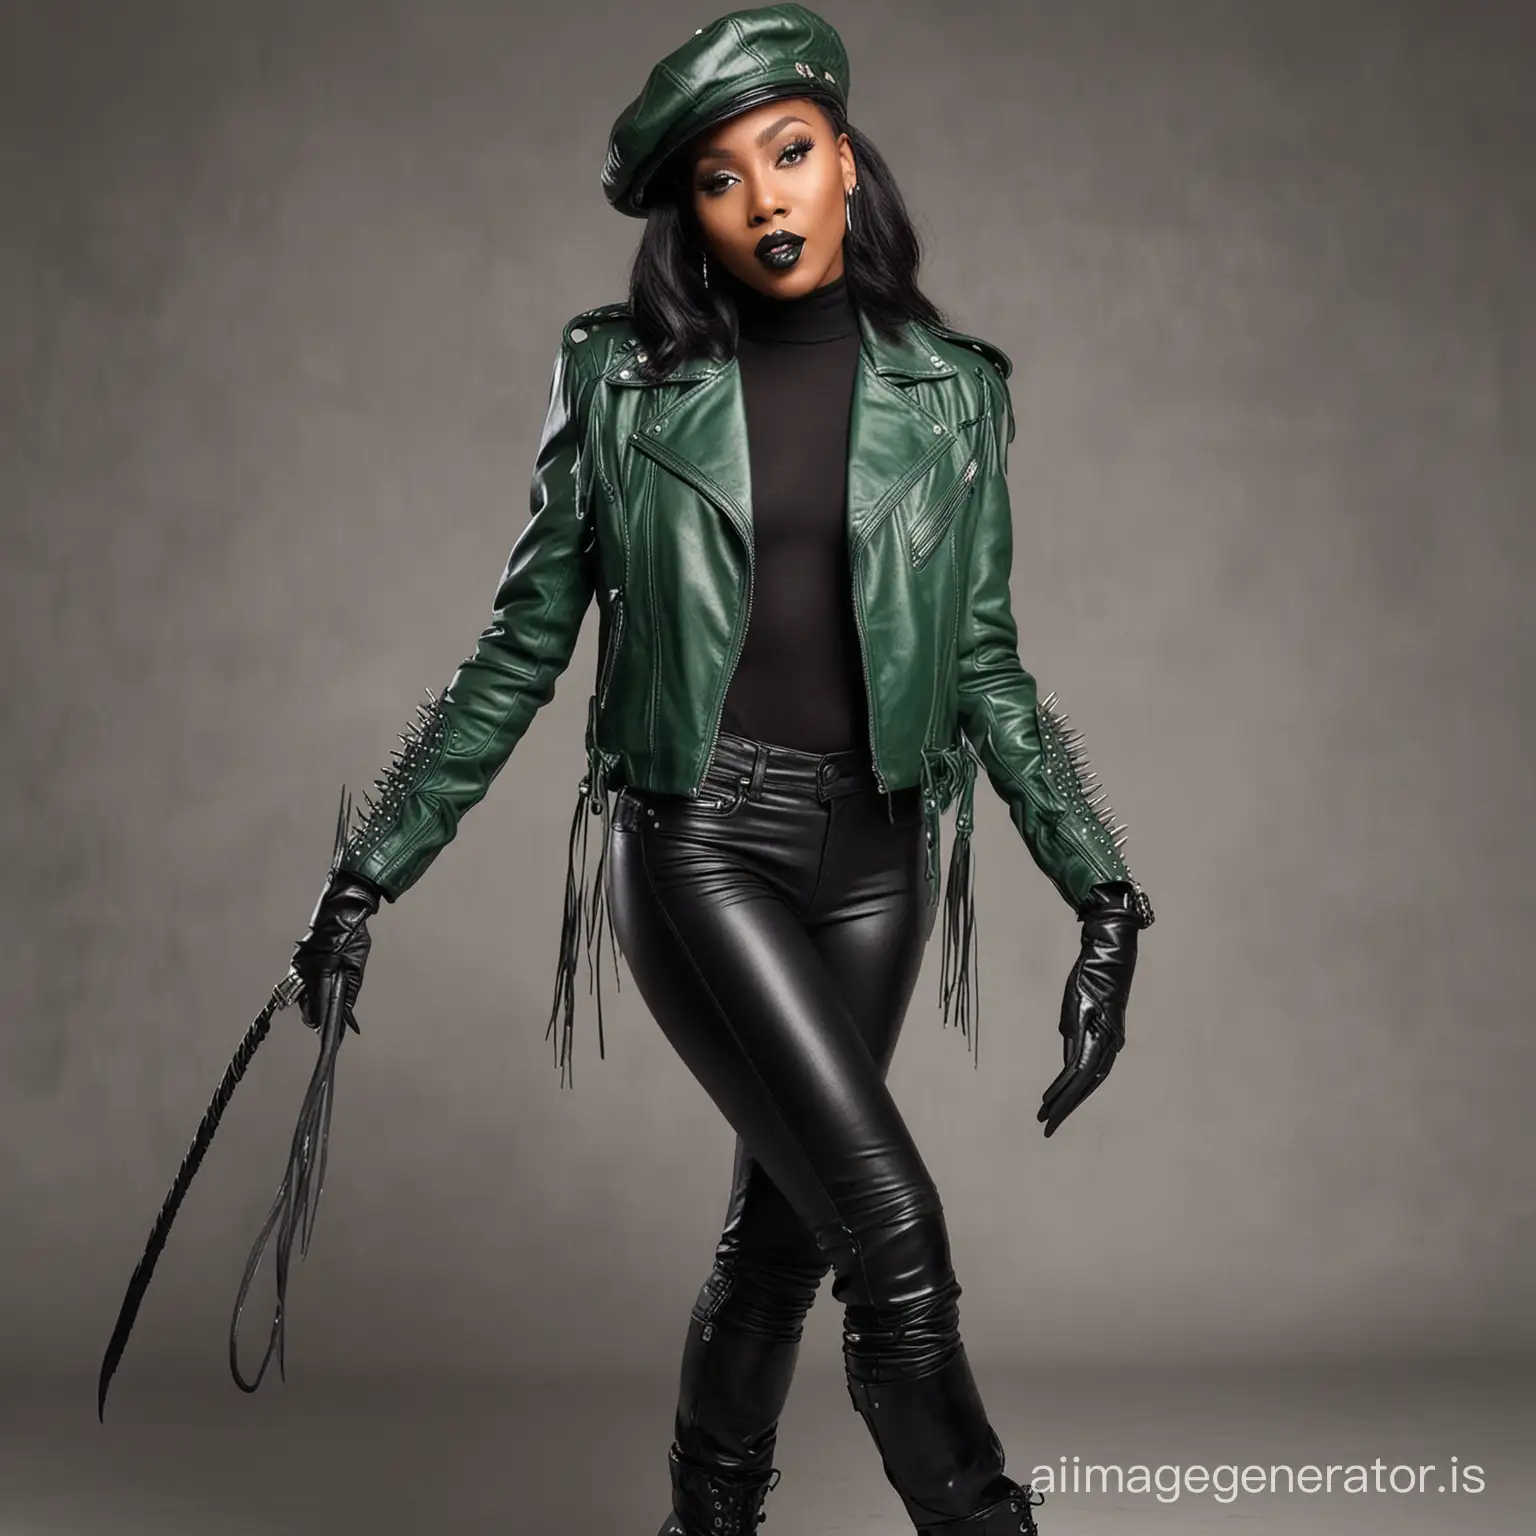 Dominatrix-Woman-in-Stylish-Leather-Outfit-with-Whip